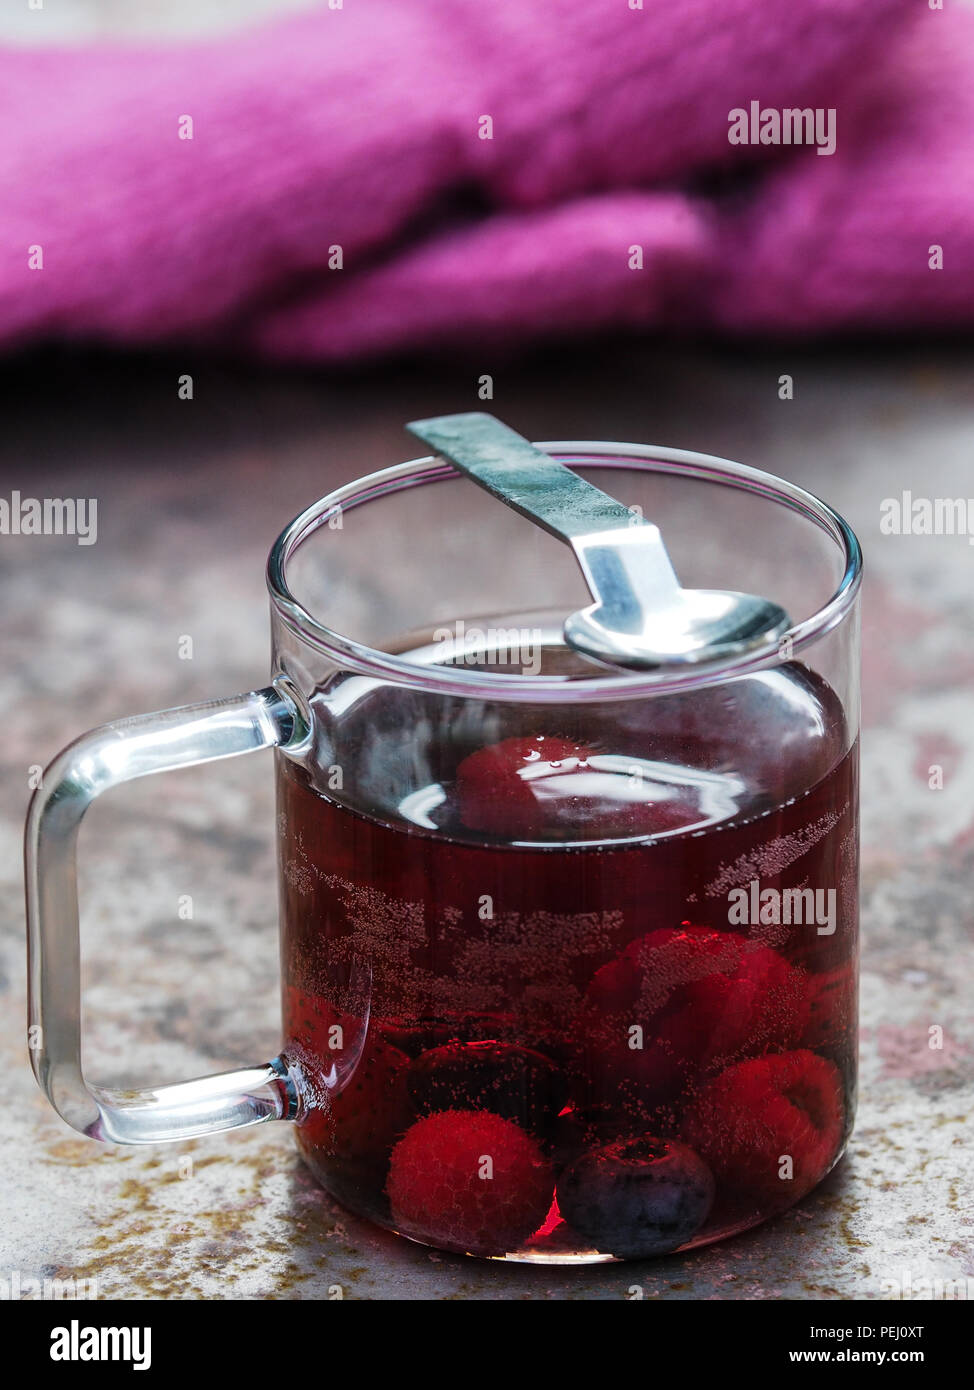 Mulled wine with berry fruits on an old red lacquered metal table with gloves in the background. Stock Photo